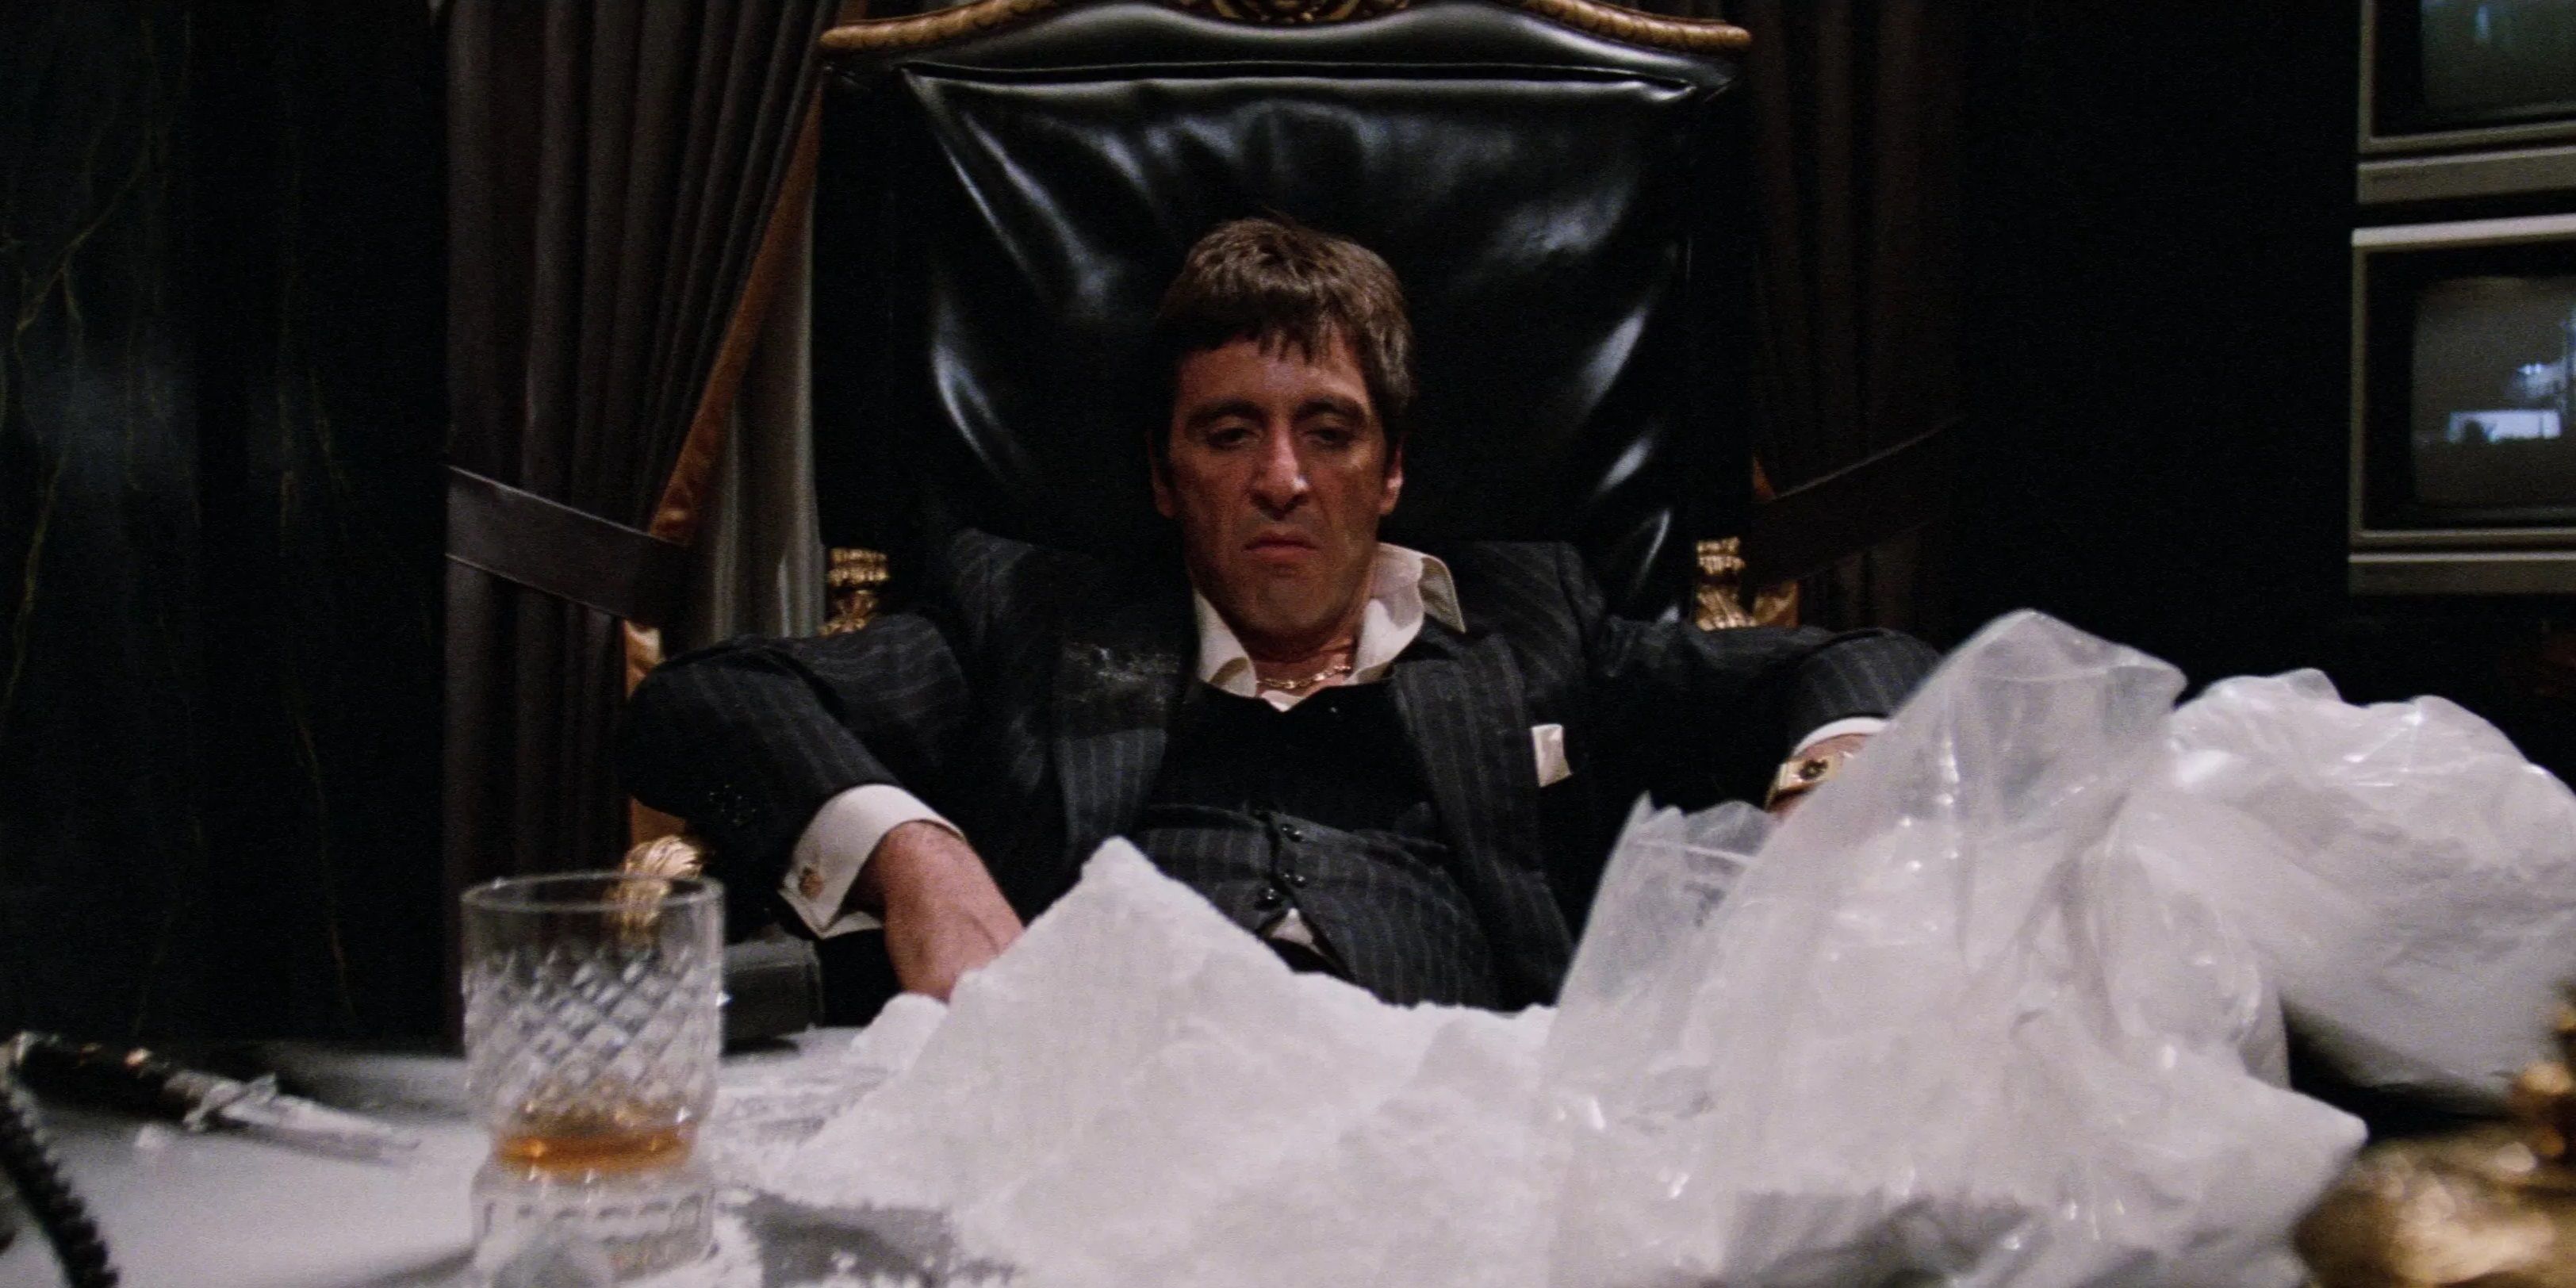 Tony Montana at his desk in Scarface